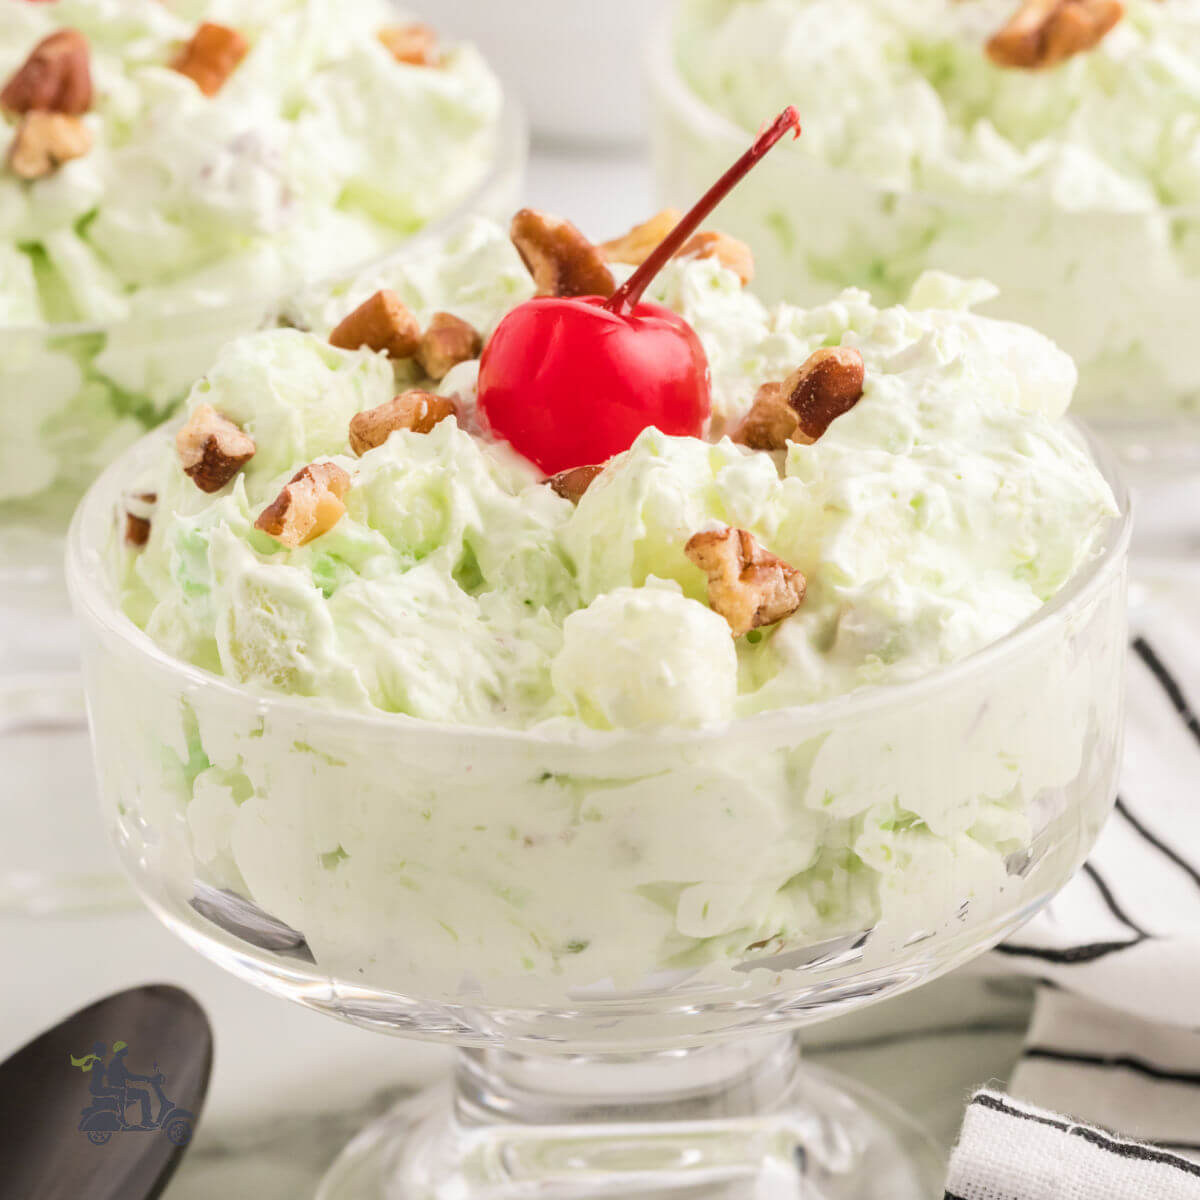 A glass goblet filled with Pistachio fluff or Watergate salad with maraschino cherry and pecans on top.